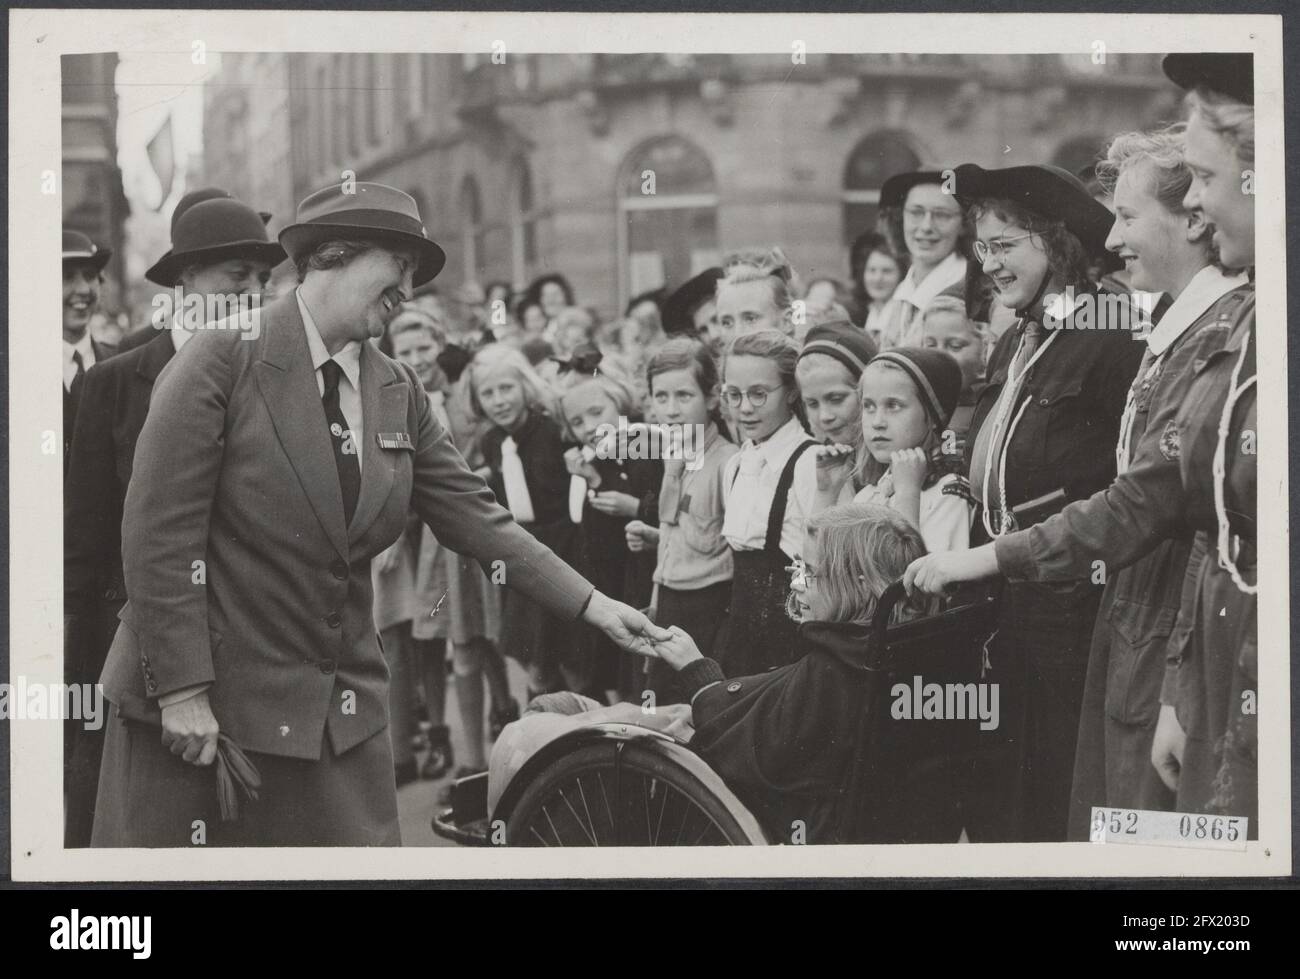 Lady Baden Powell, touring Europe, attended a demonstration by Boy Scouts from the North Holland district. The demonstration was held on Dam Square in Amsterdam. Lady Baden Powell greets an invalid scoutmaster, September 29, 1946, visits, children, receptions, scouting, The Netherlands, 20th century press agency photo, news to remember, documentary, historic photography 1945-1990, visual stories, human history of the Twentieth Century, capturing moments in time Stock Photo